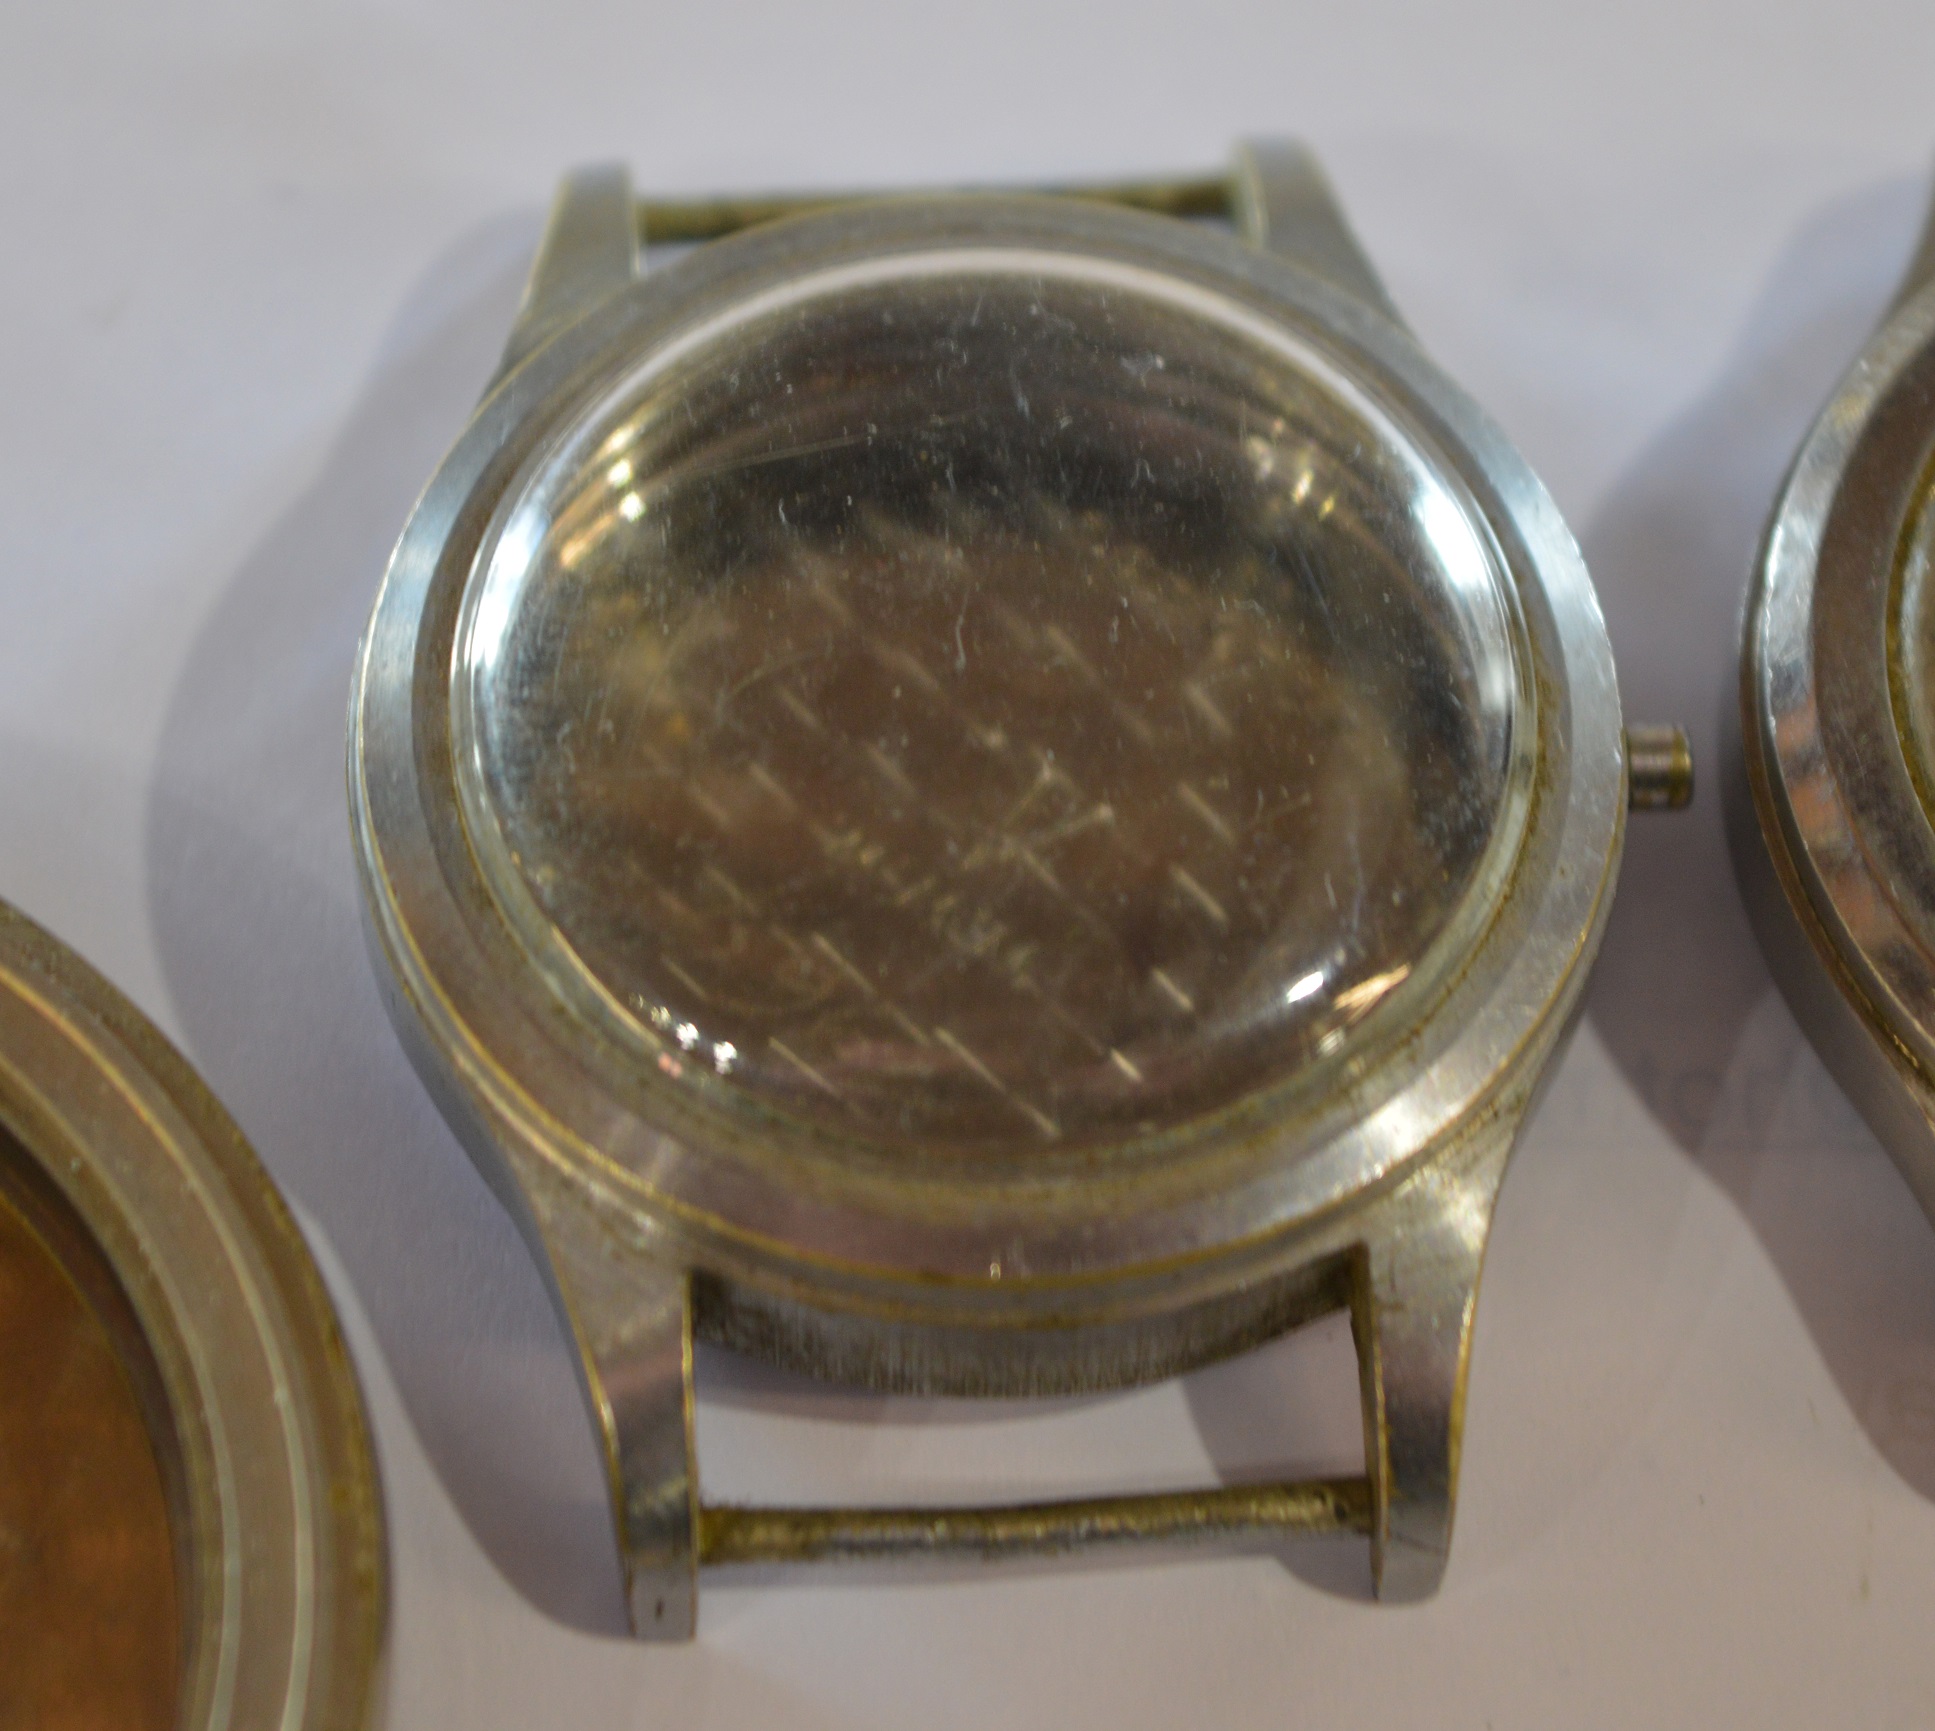 2 military pocket watches and 2 watch cases with military broad arrow & 'WWW' marks (Possibly Dirty - Image 3 of 6